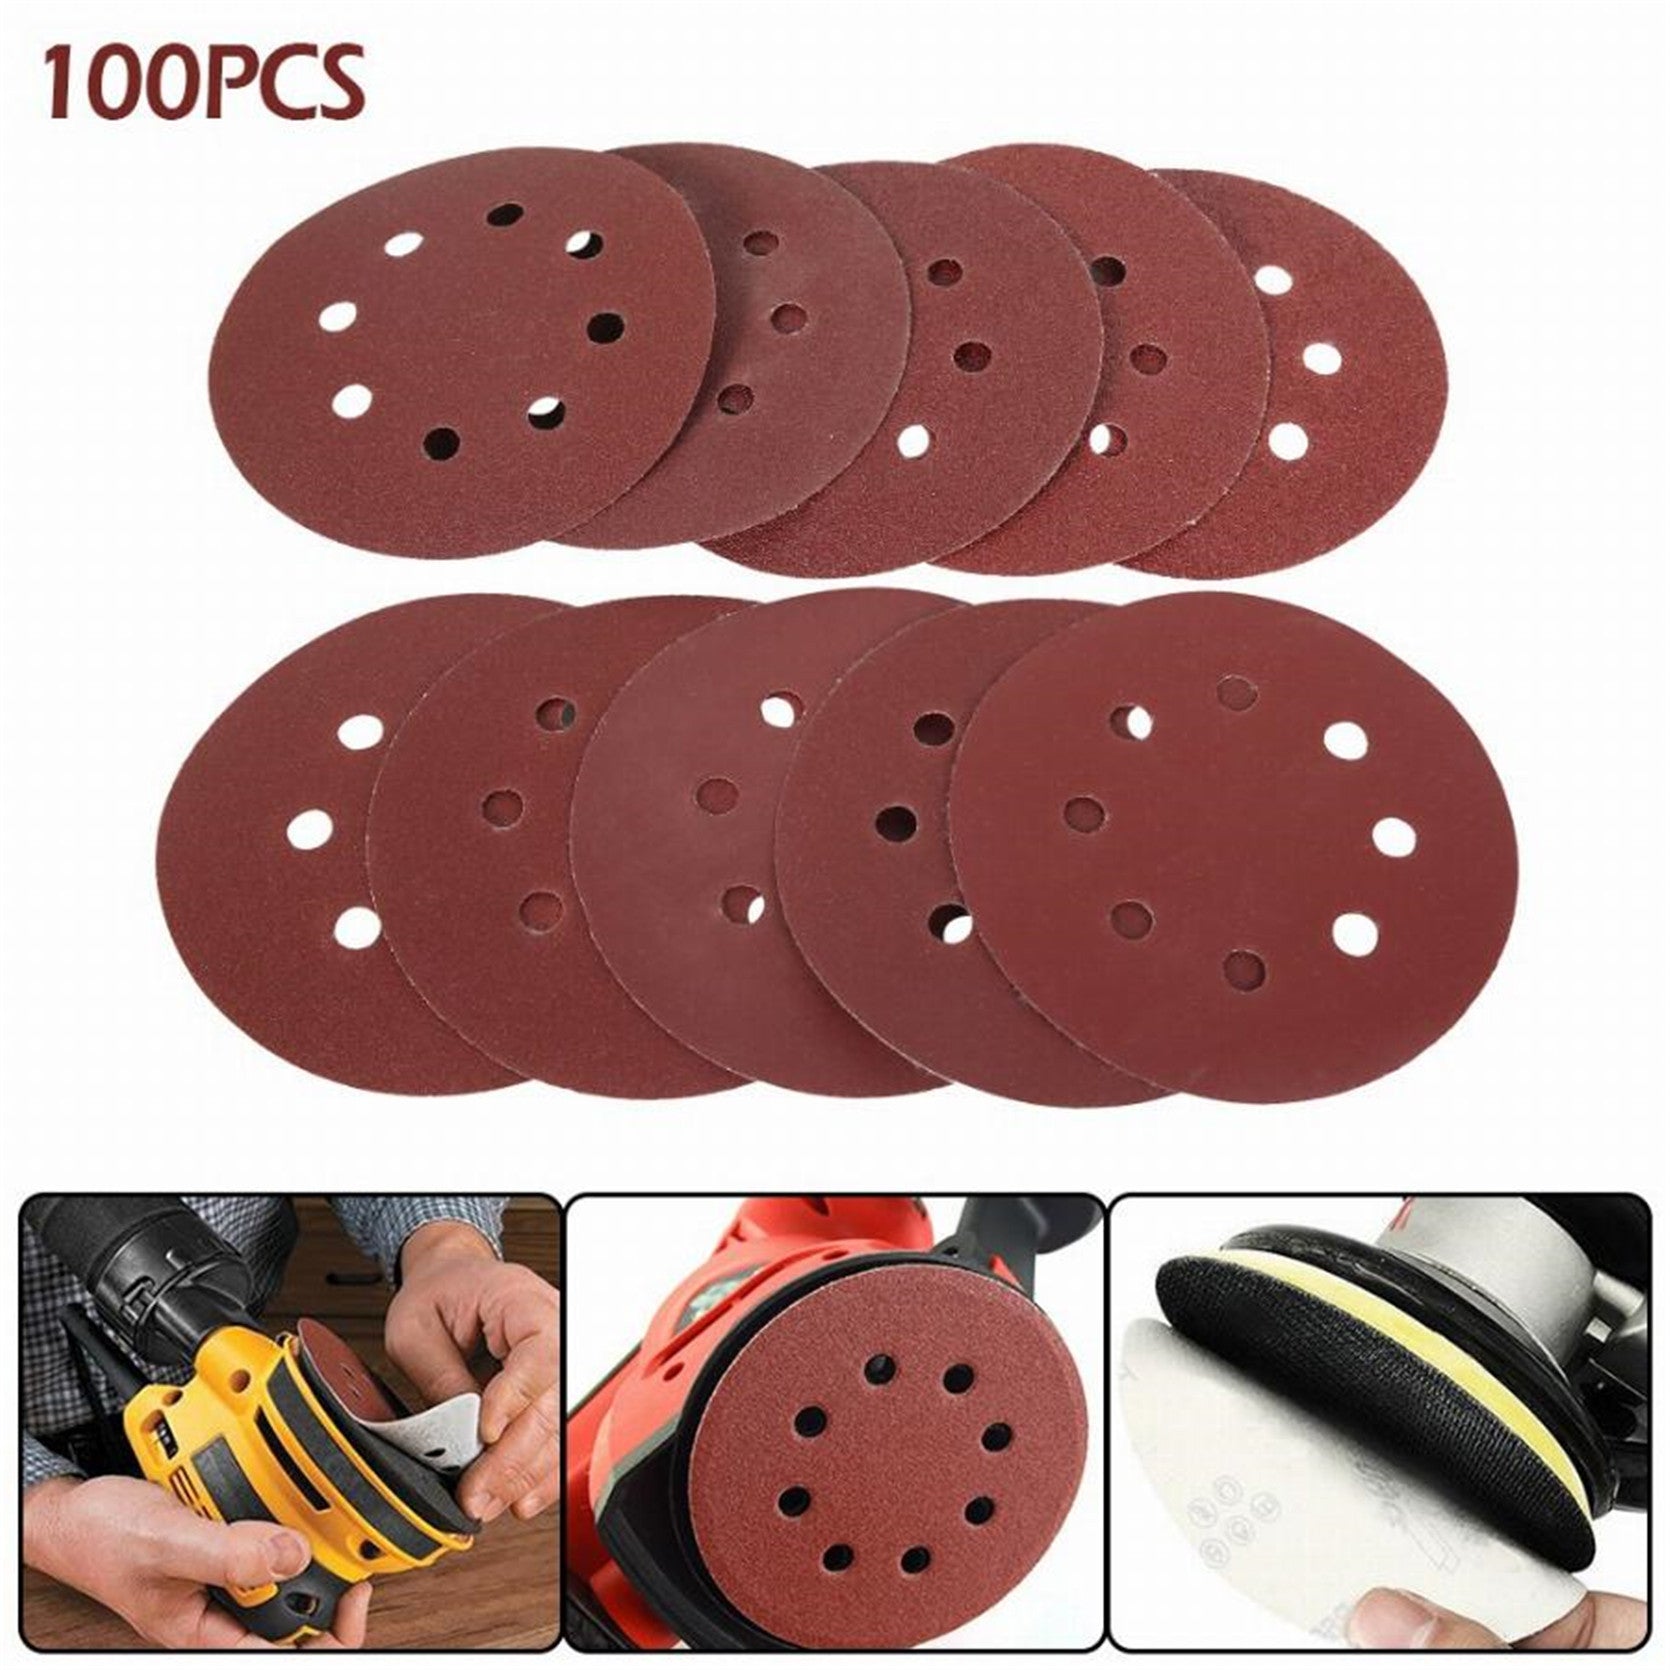 findmall 100Pcs 5'' Inch 8-Hole Hook-and-Loop Sanding Disc Sander Paper 320 Grit FINDMALLPARTS